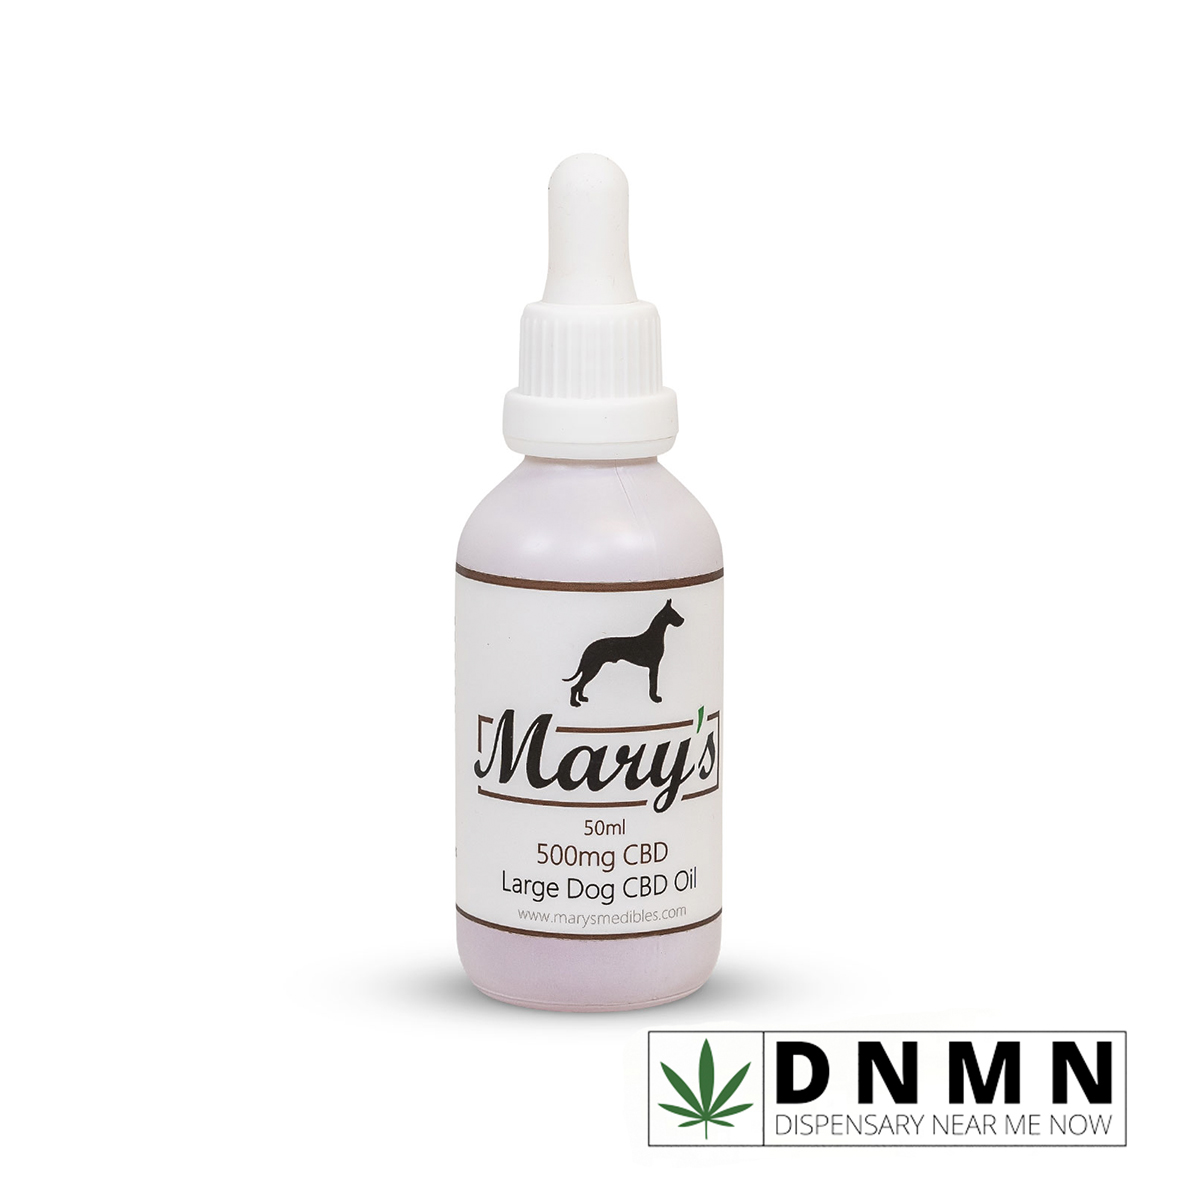 Mary’s Medibles Large Dog CBD Tincture 500mg | Buy Tincture Online | Dispensary Near Me